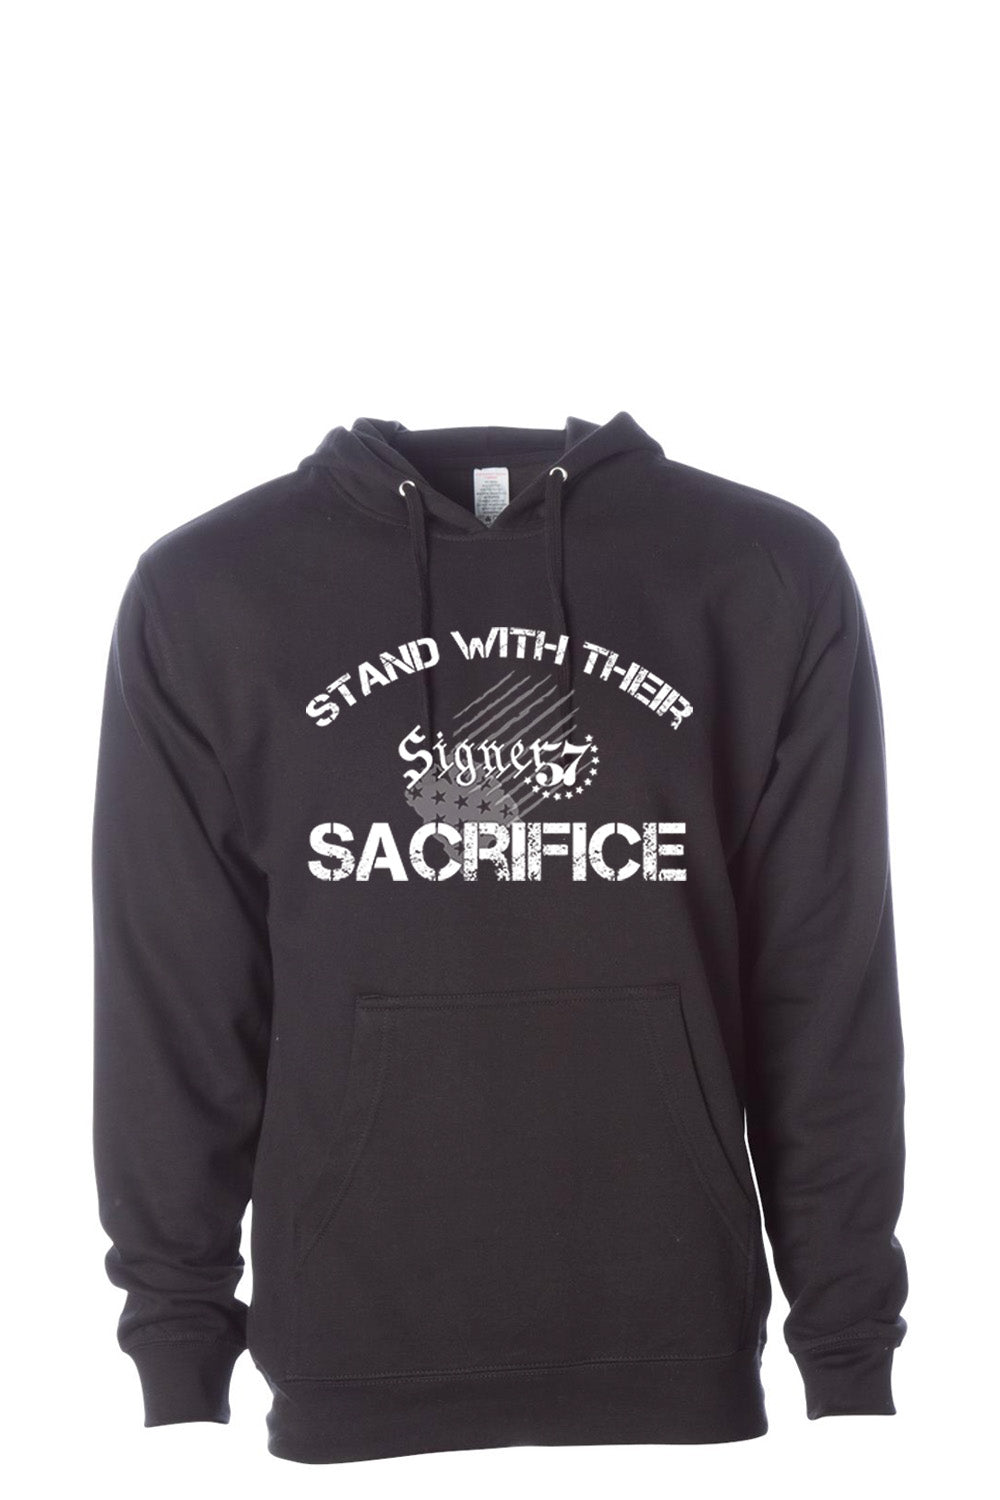 UNISEX Hoodie - Stand With Their Sacrifice